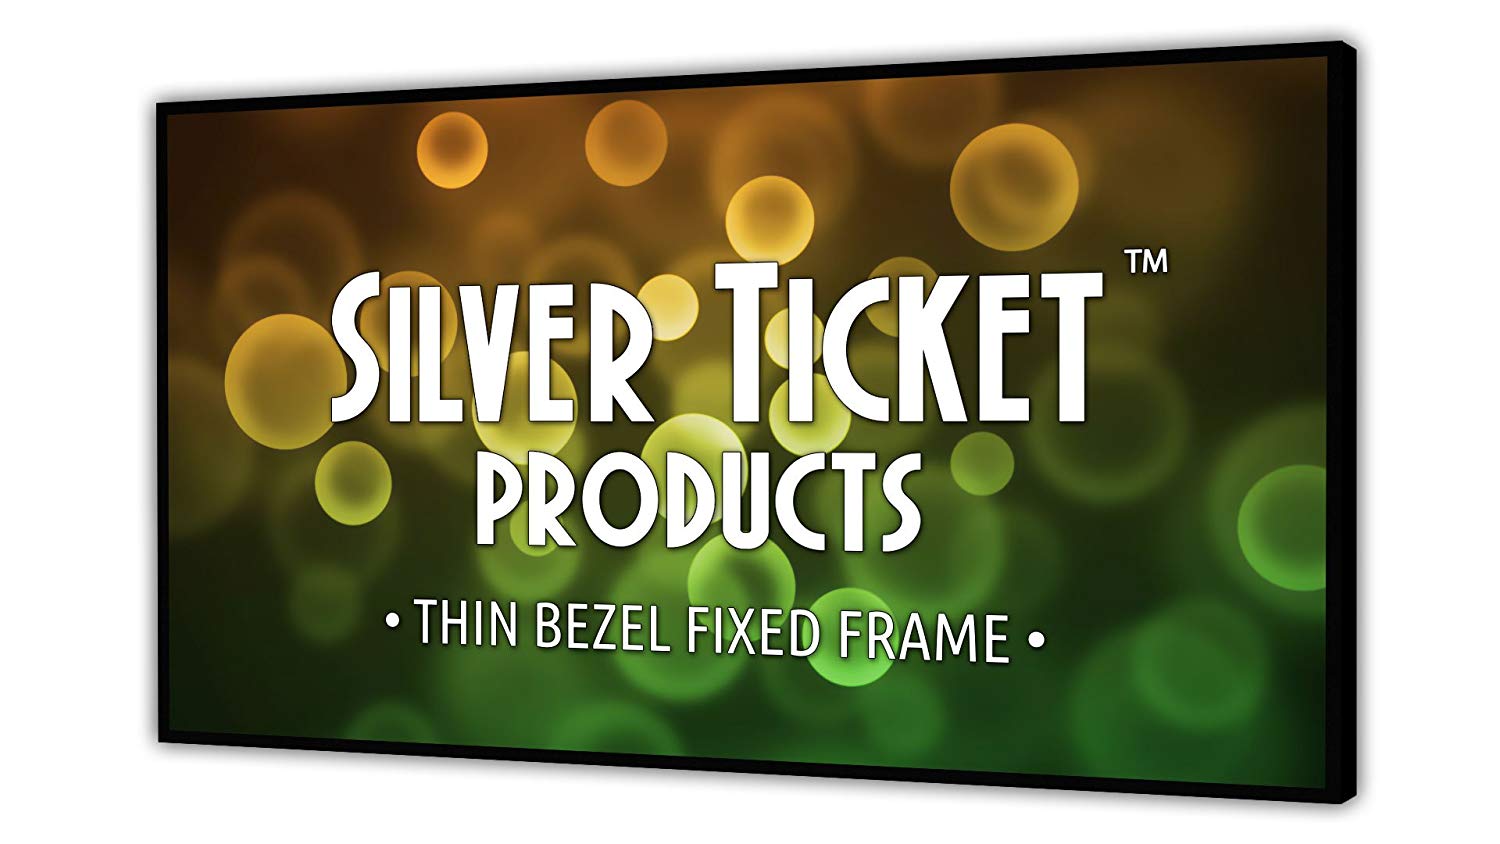 silver ticket products on a television